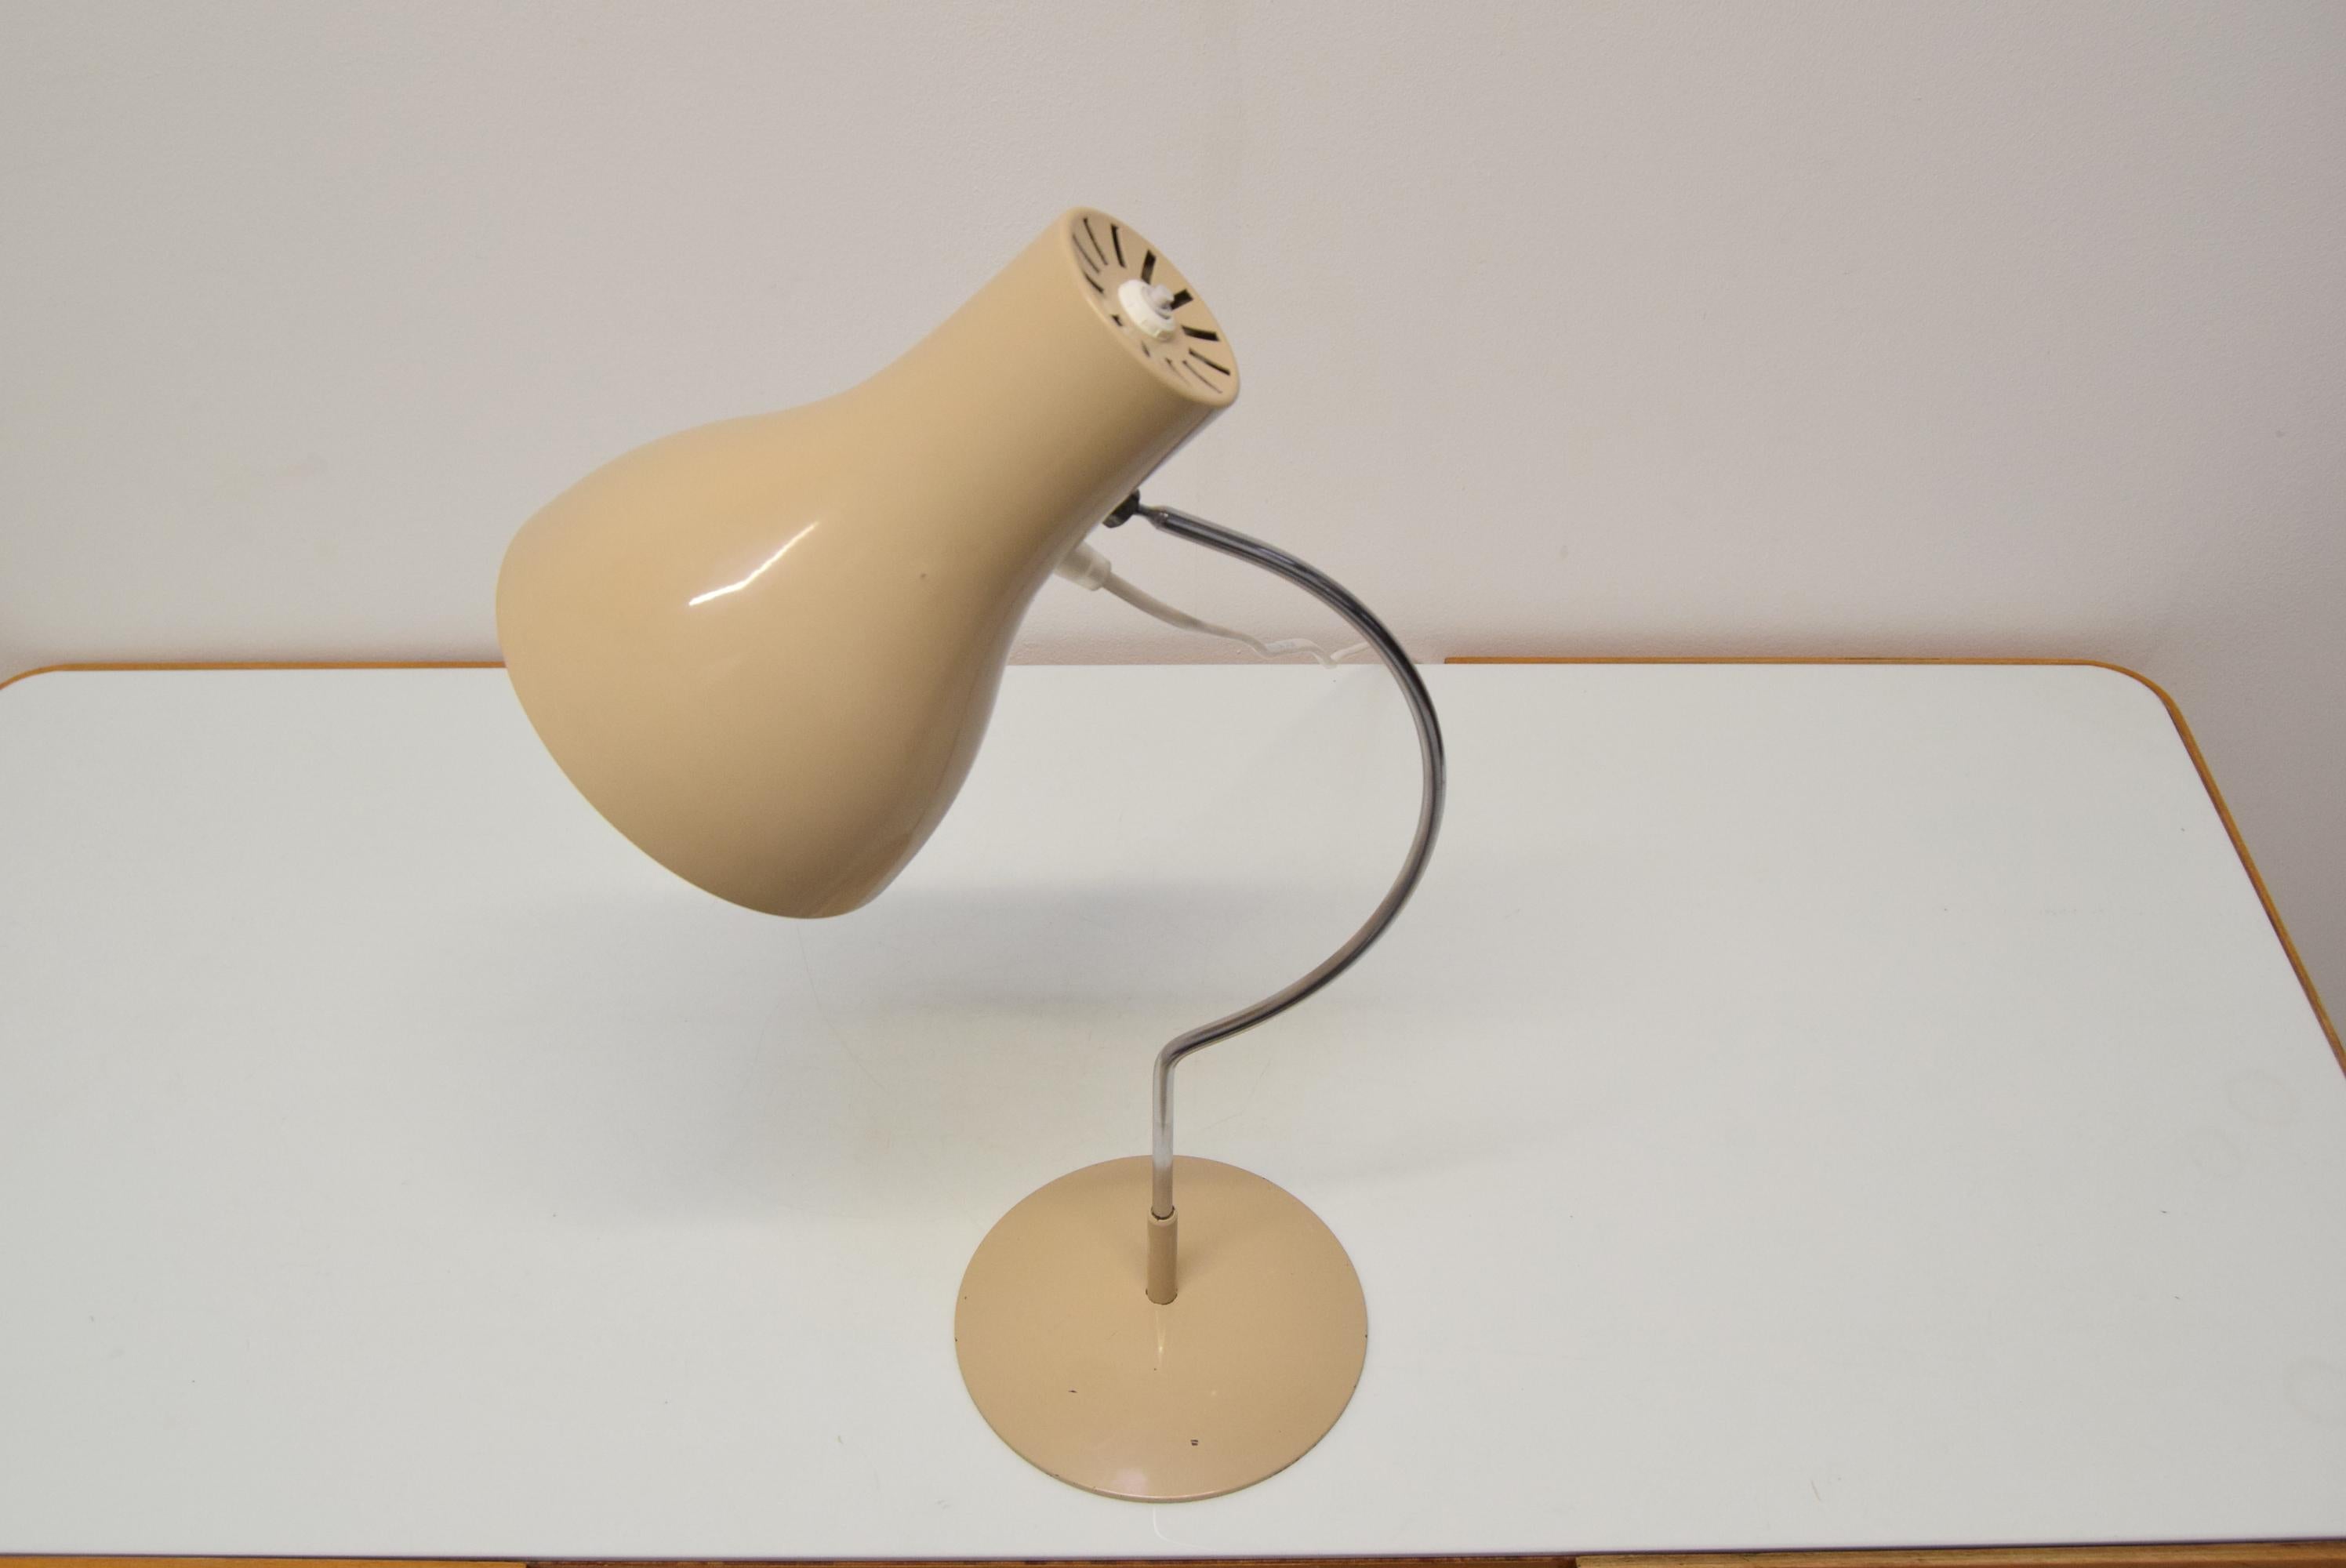 Czech Mid-Century Table Lamp Designed by Josef Hurka for Napako, 1970's